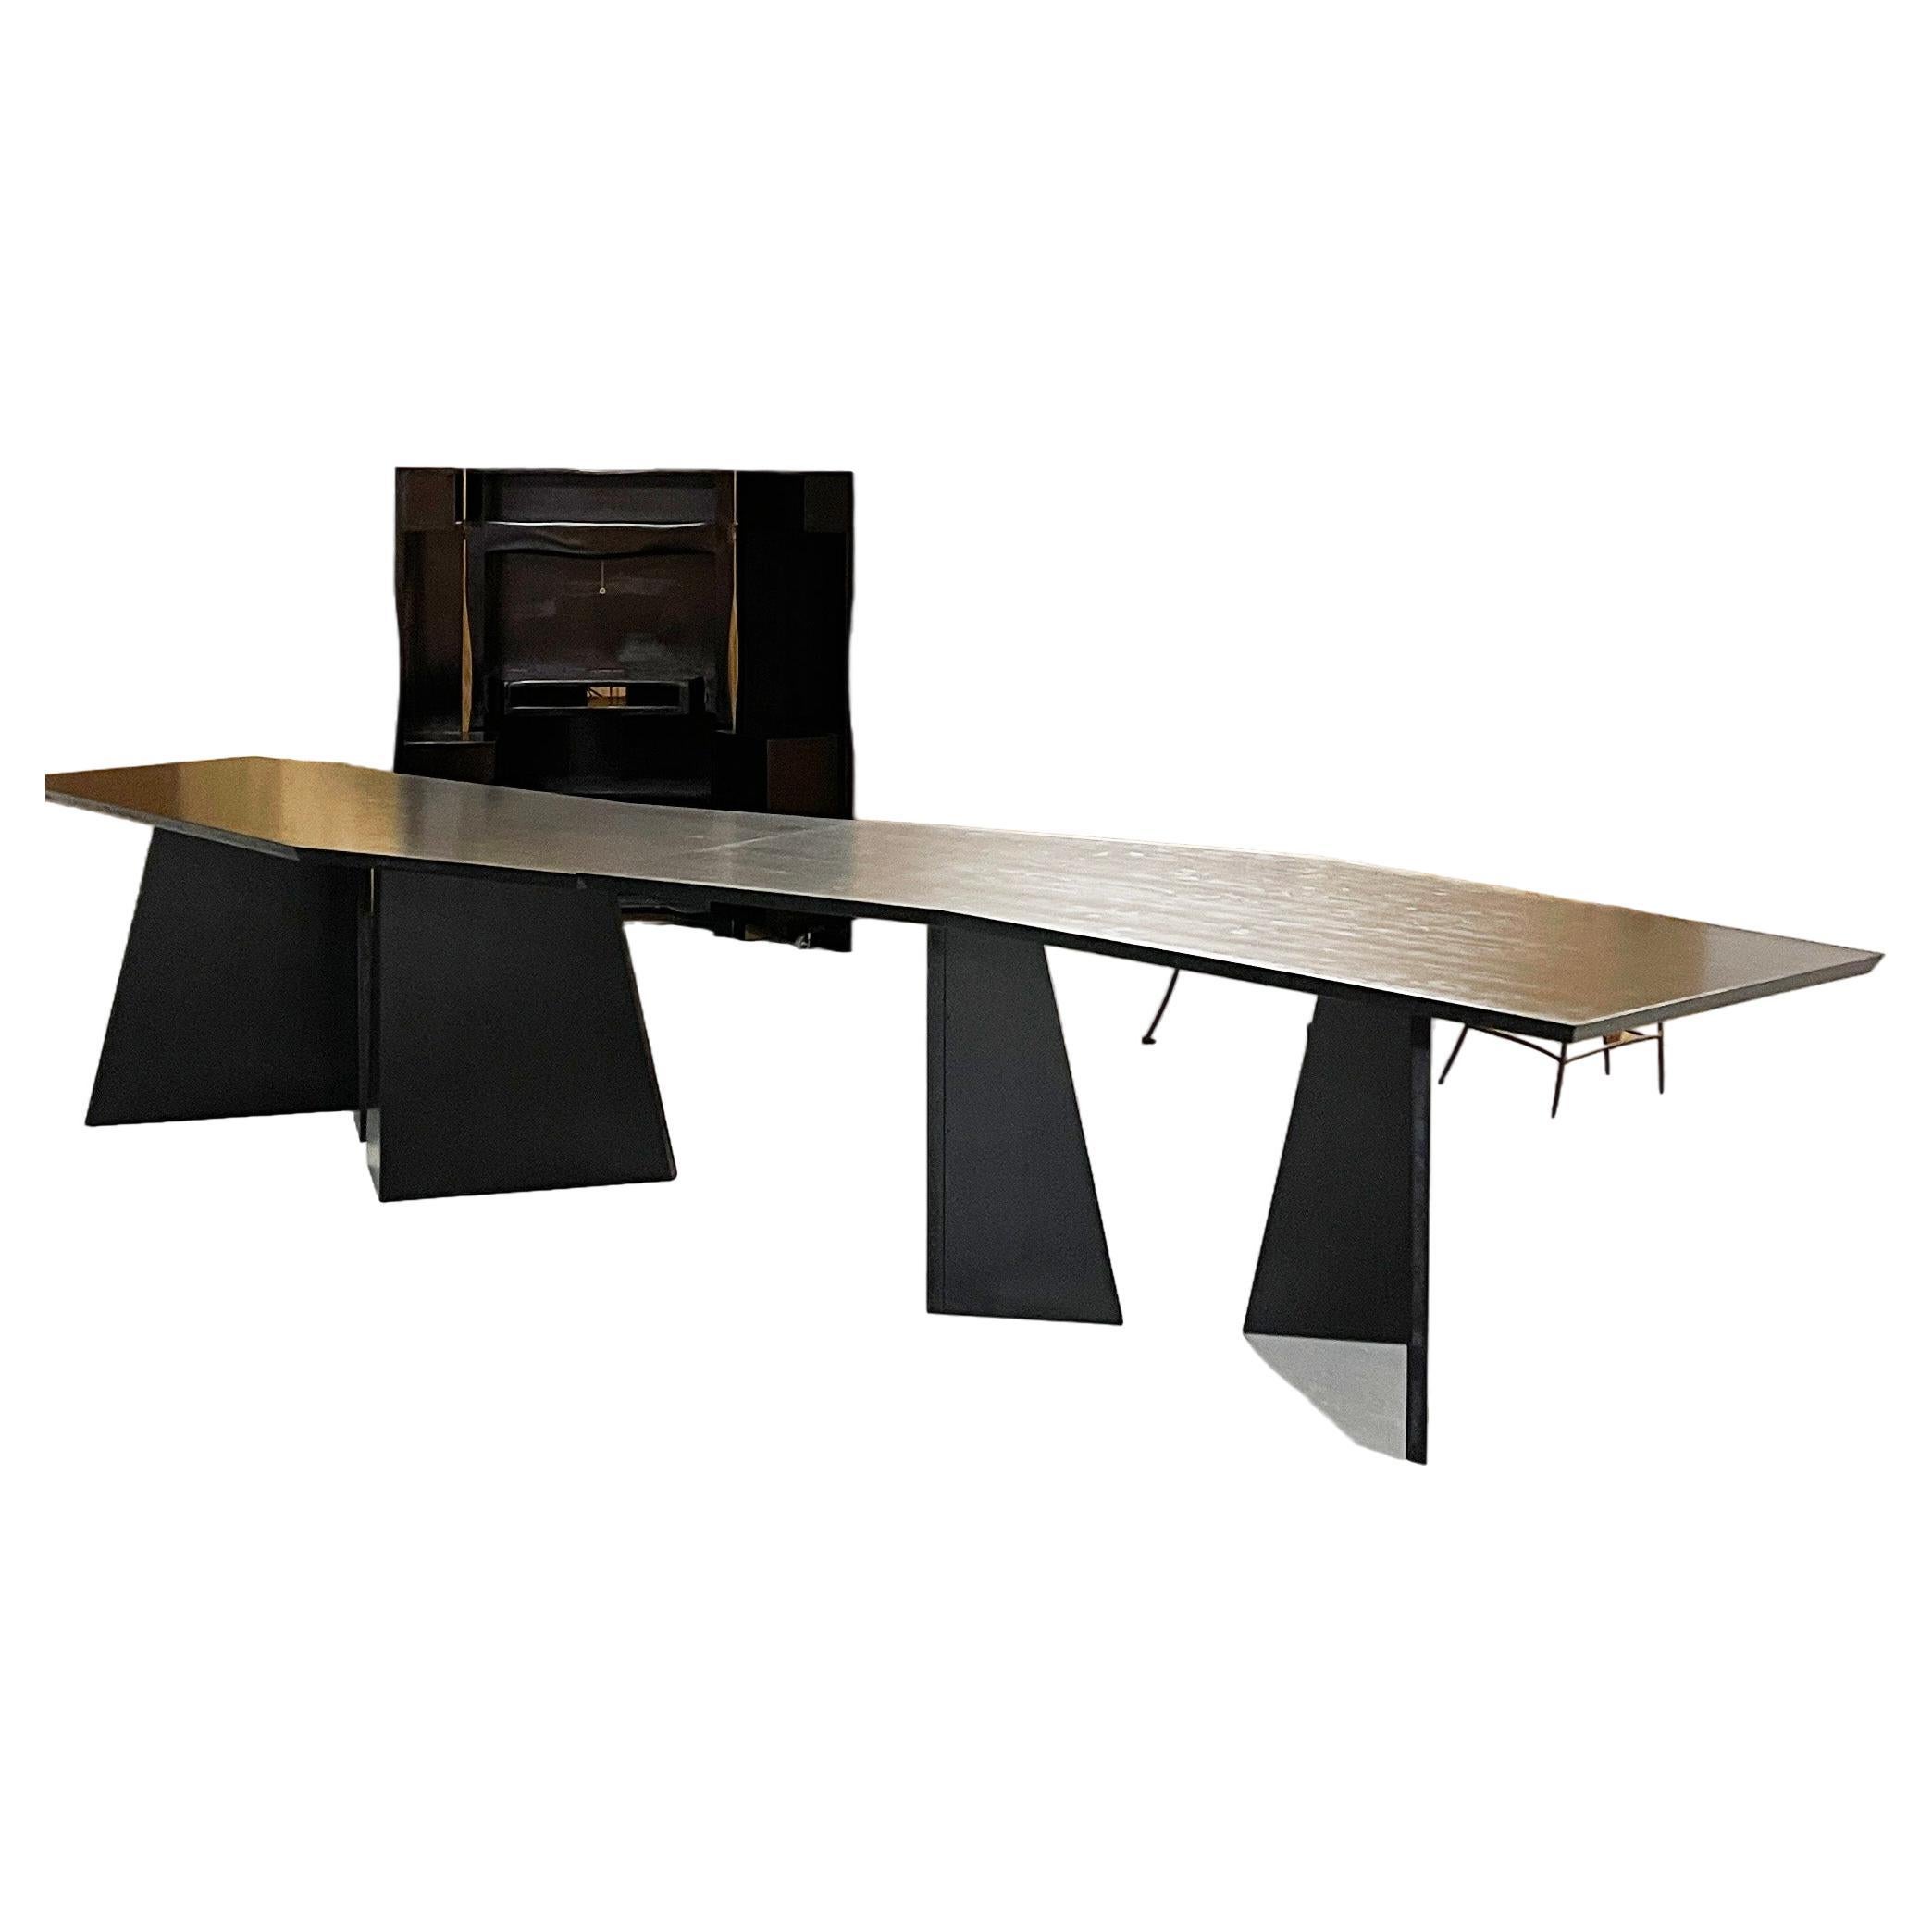 Double Dining Table / Desk "Nazca" For Sale